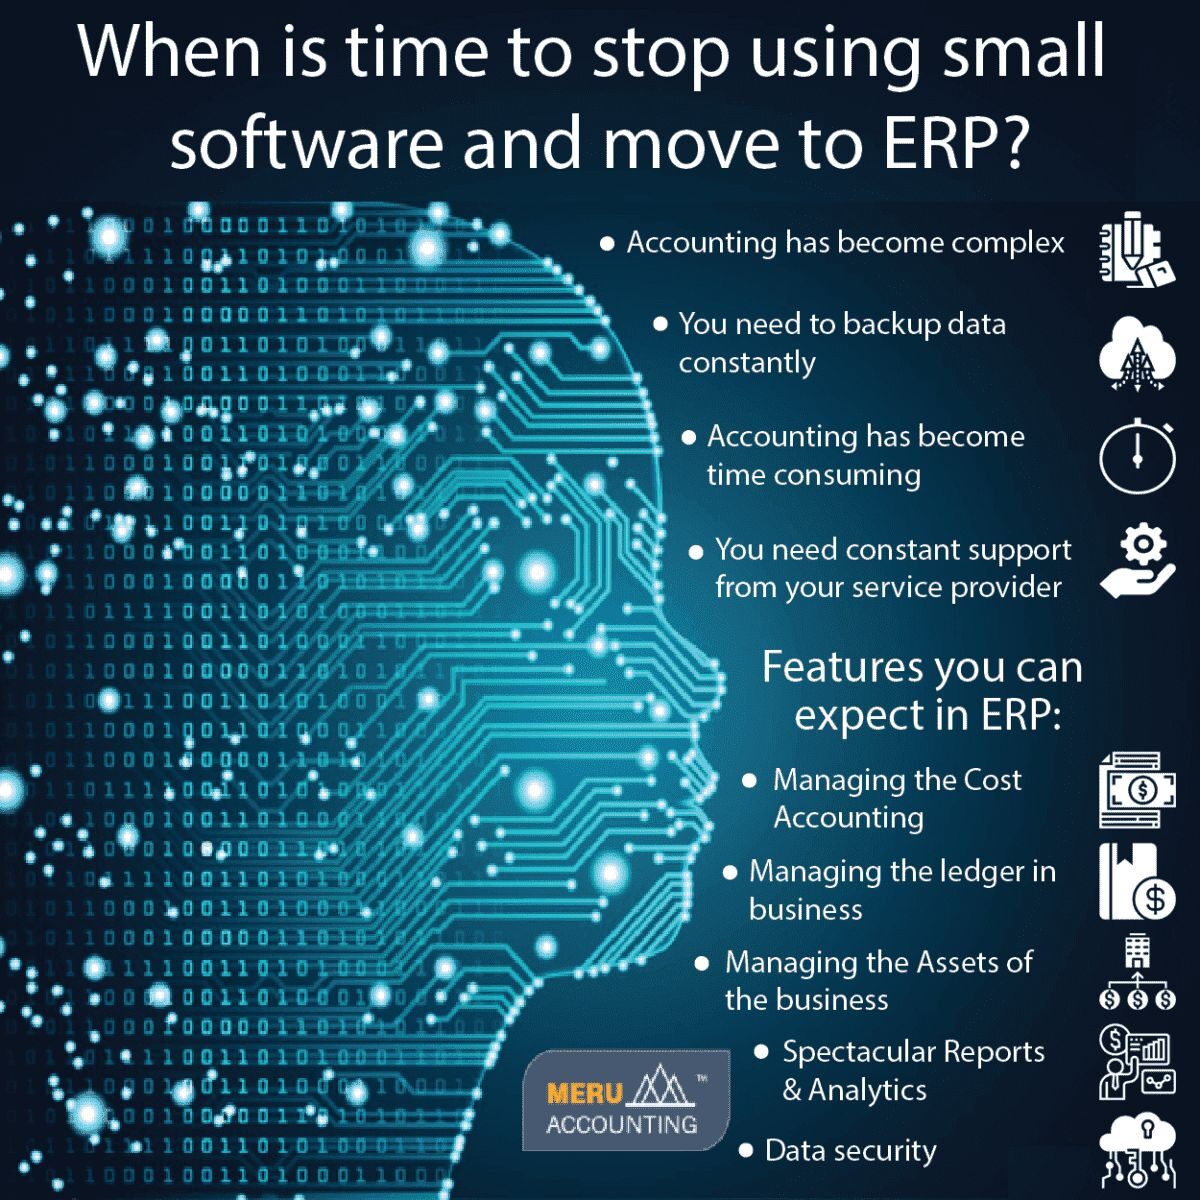 When-is-time-to-stop-using-small-software-and-move-to-ERP